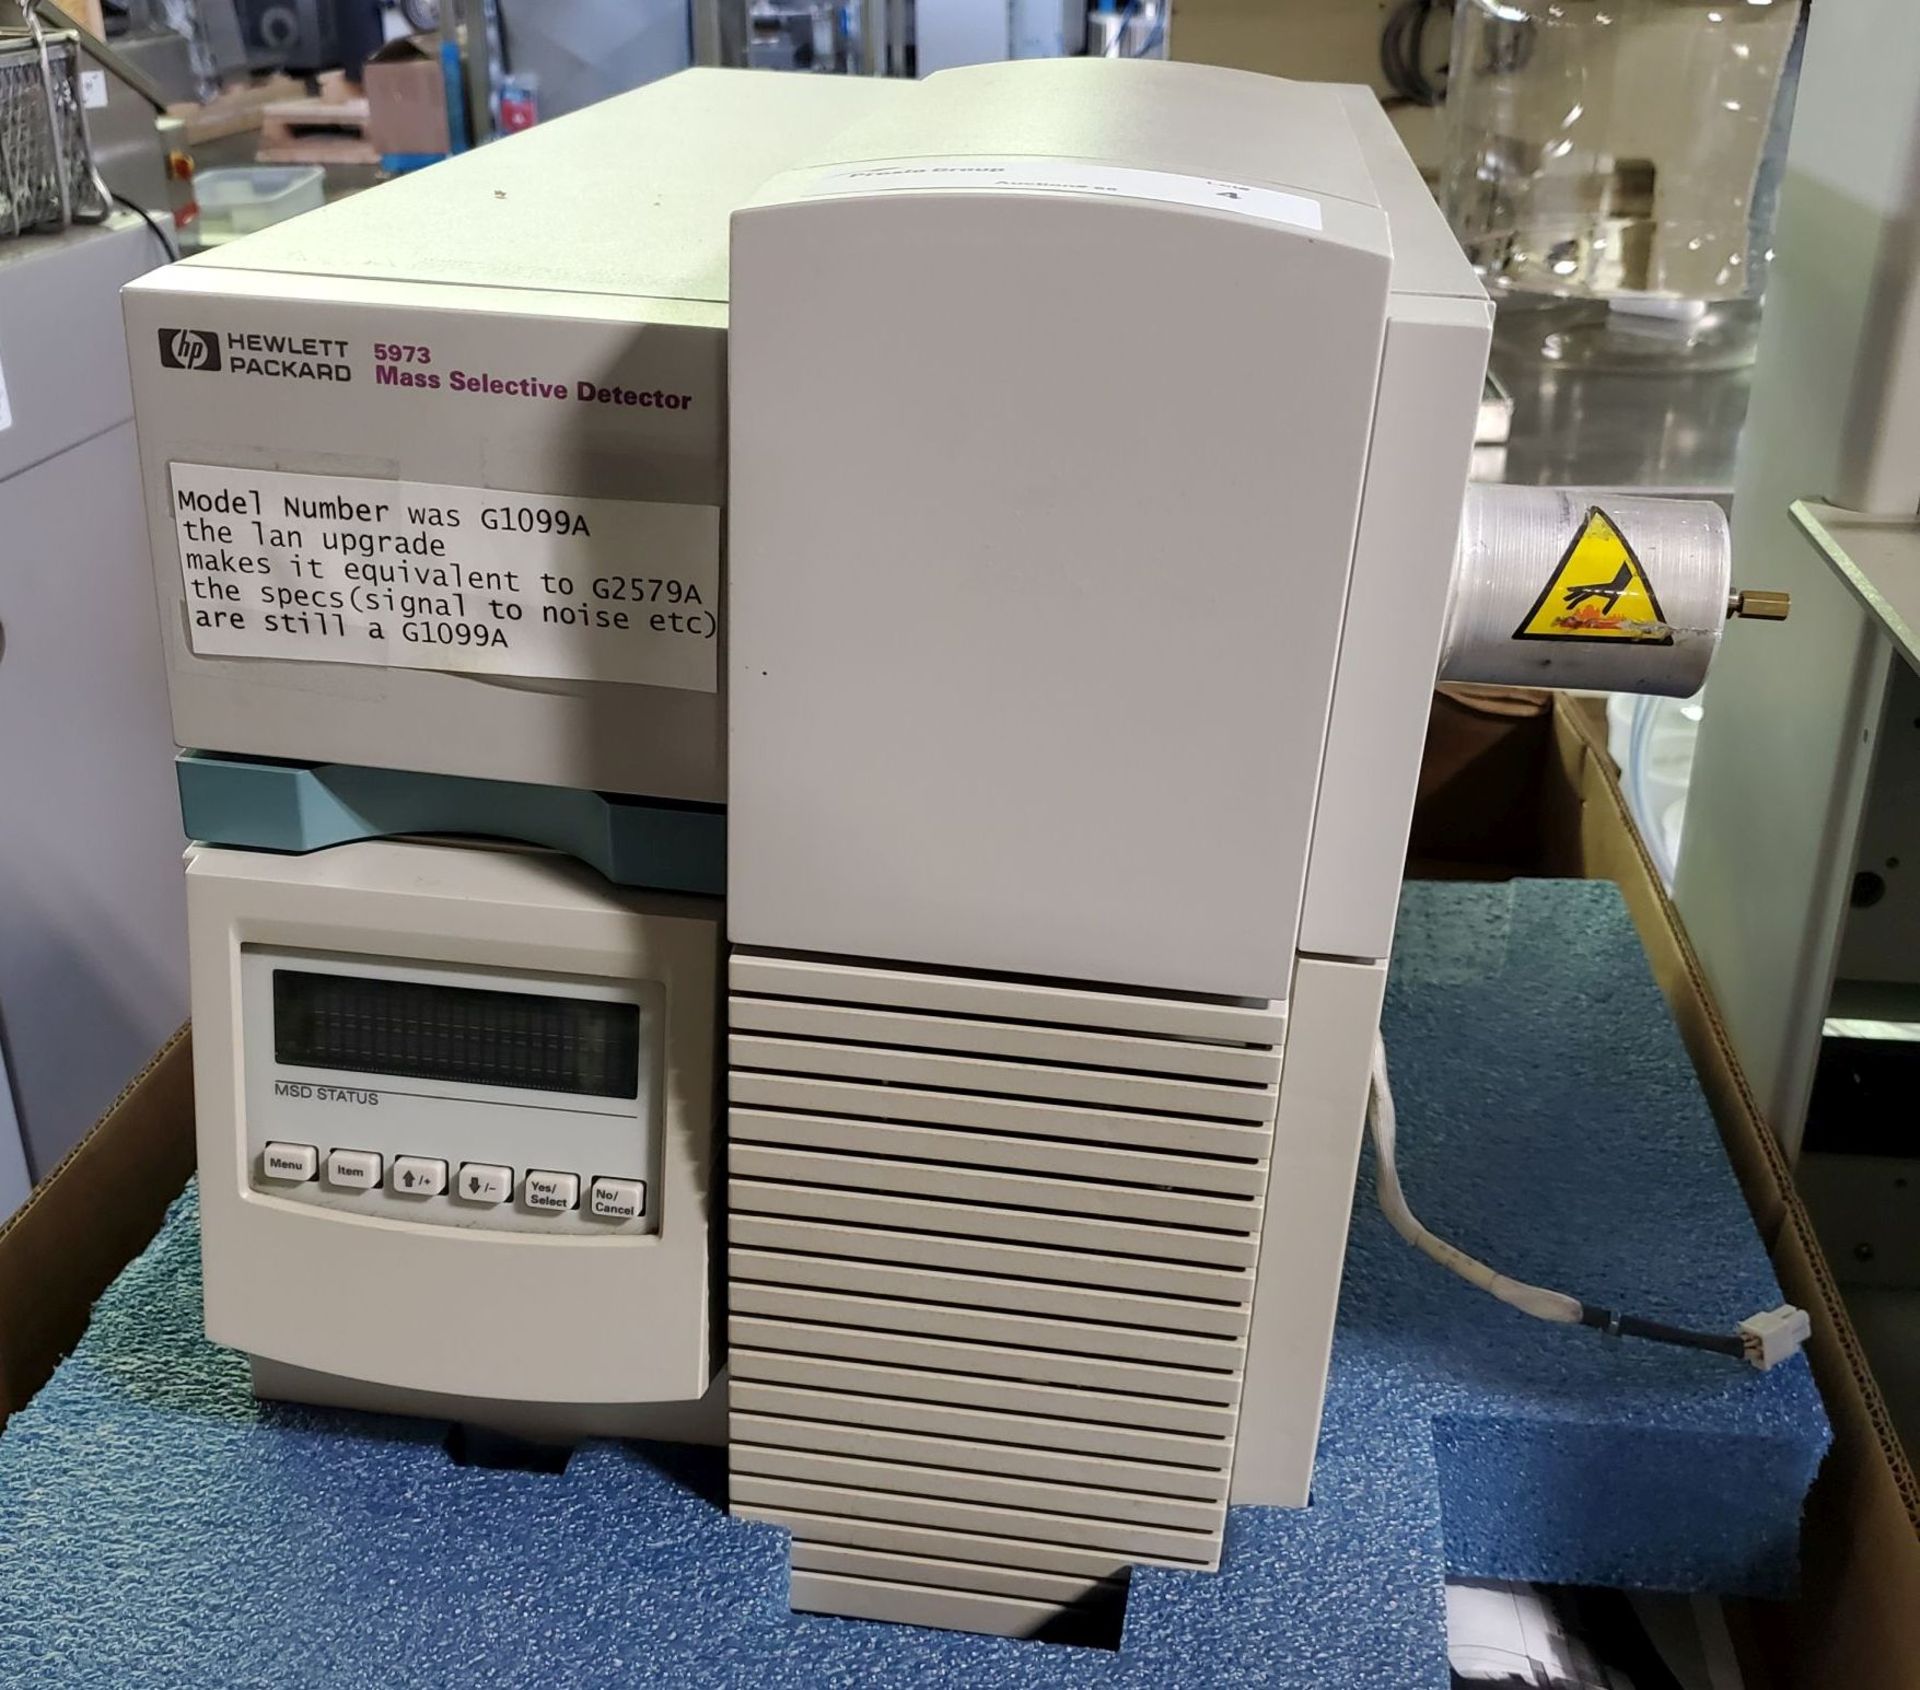 Agilent Mass Selective Detector, model 5973, with network upgrade, serial# US10490162.